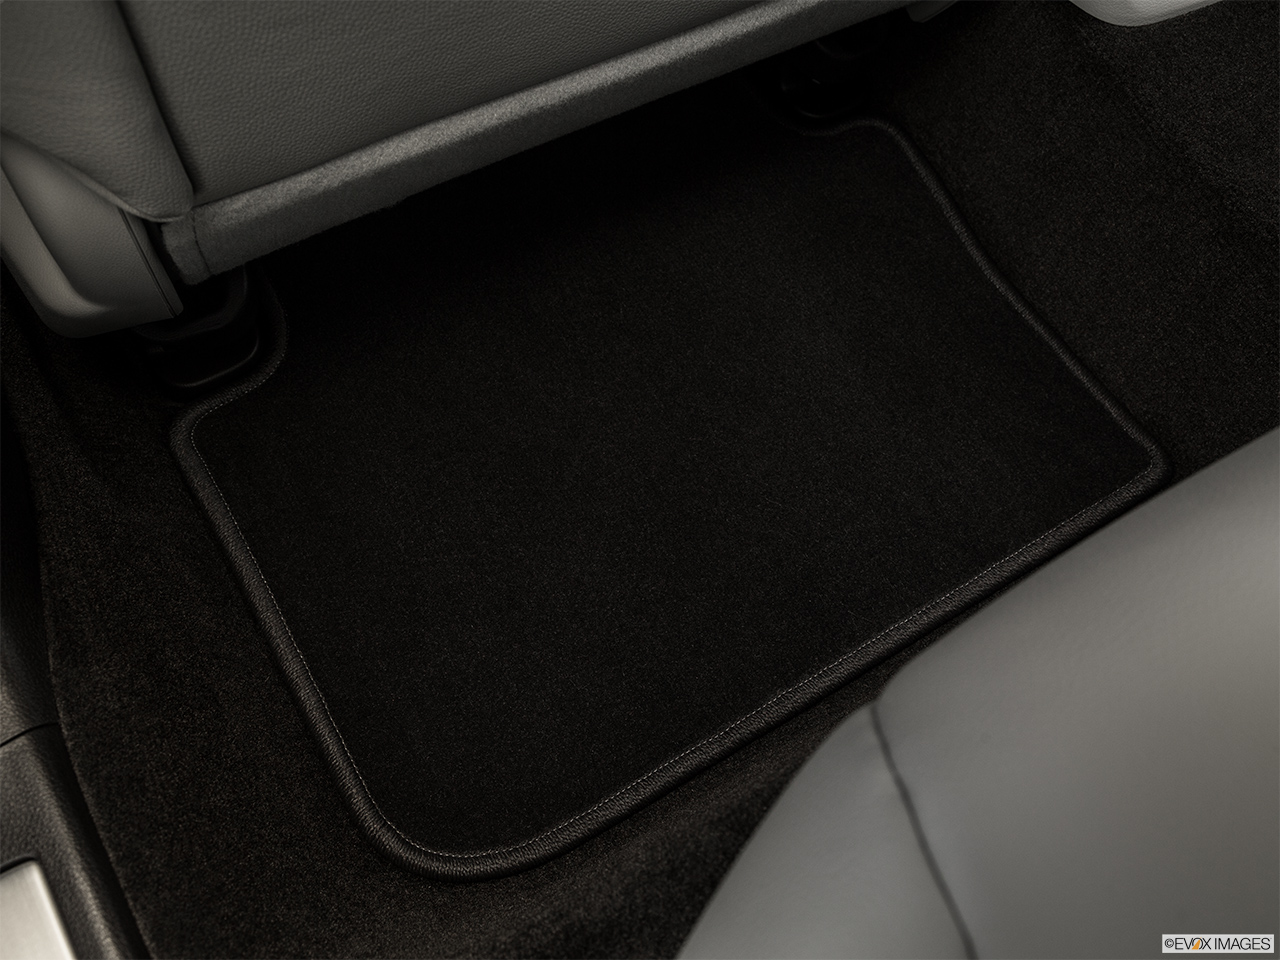 2015 Acura TLX 3.5 V-6 9-AT P-AWS Rear driver's side floor mat. Mid-seat level from outside looking in. 